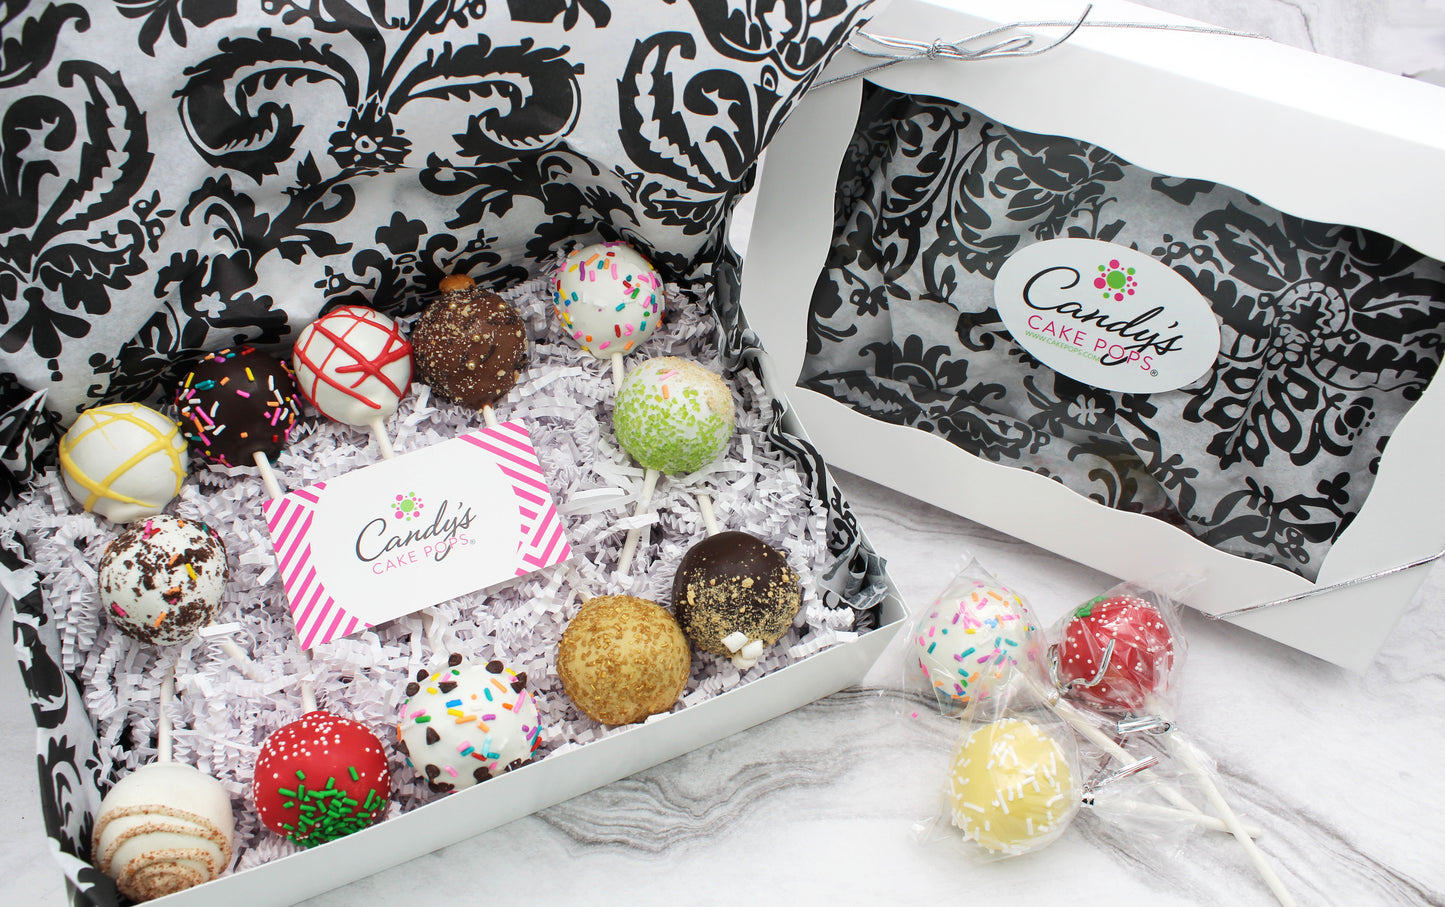 The Variety Box - Candy's Cake Pops